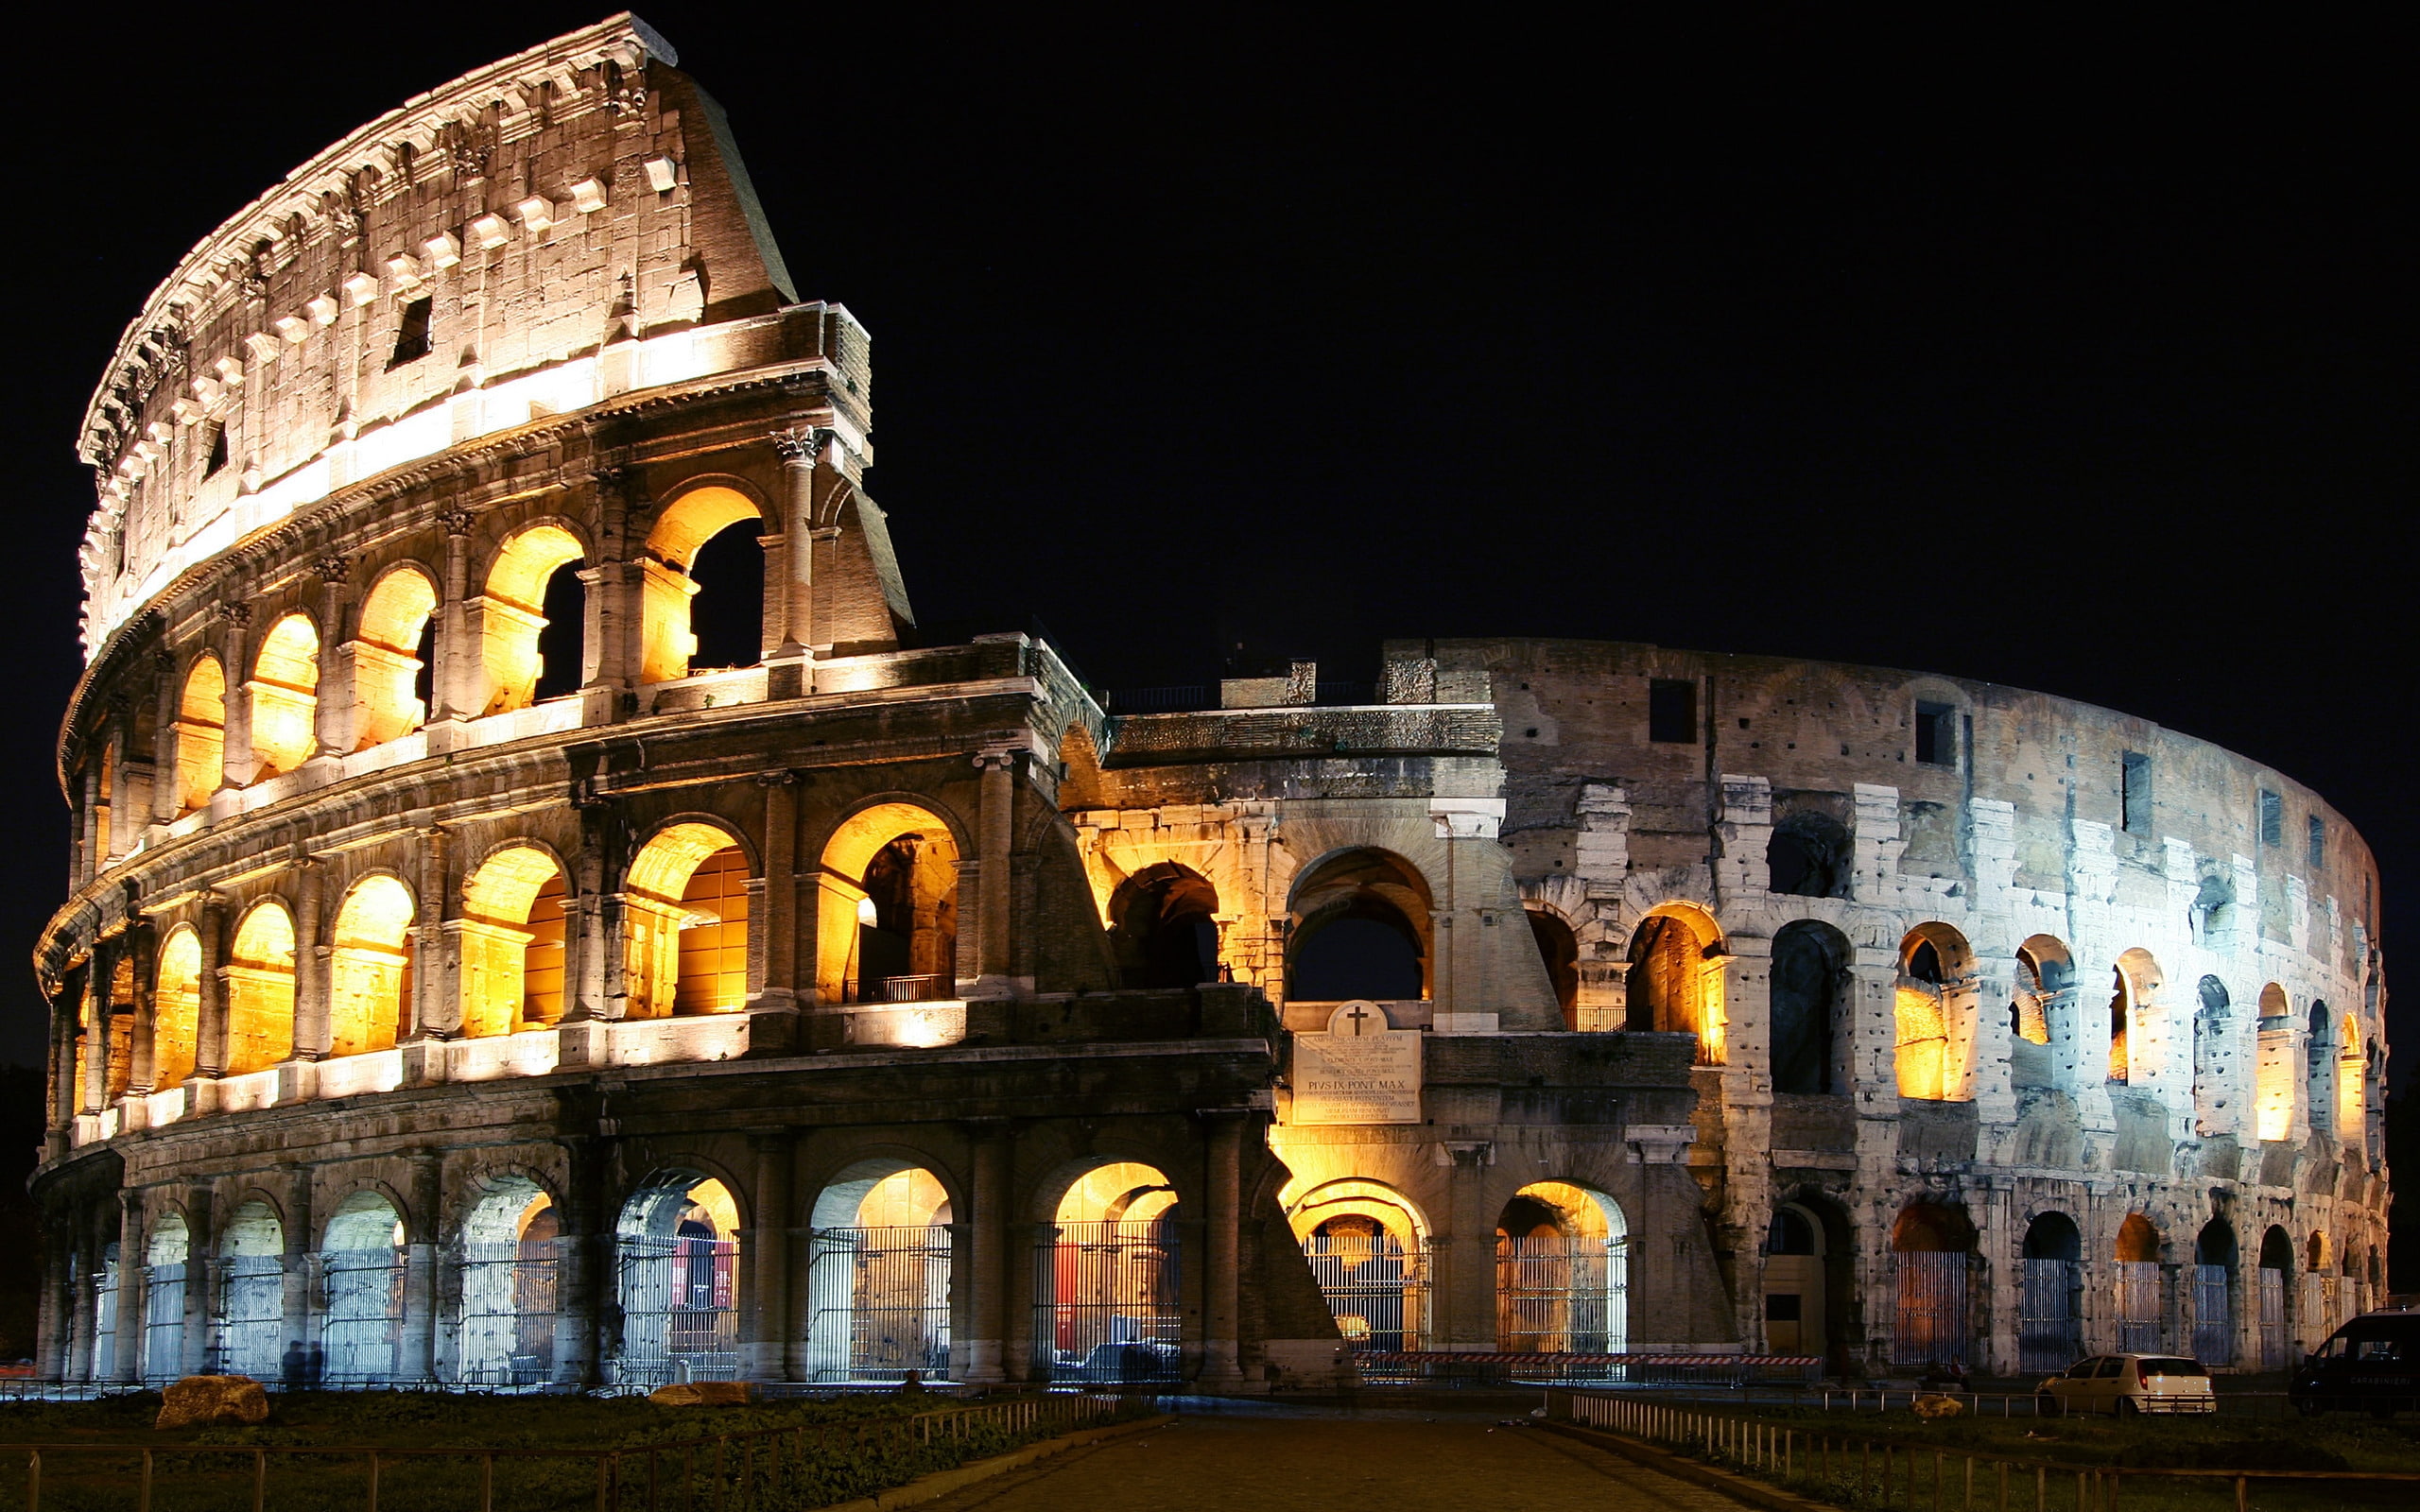 Colosseum Italy, colosseum at night time, buildings, museum, monument